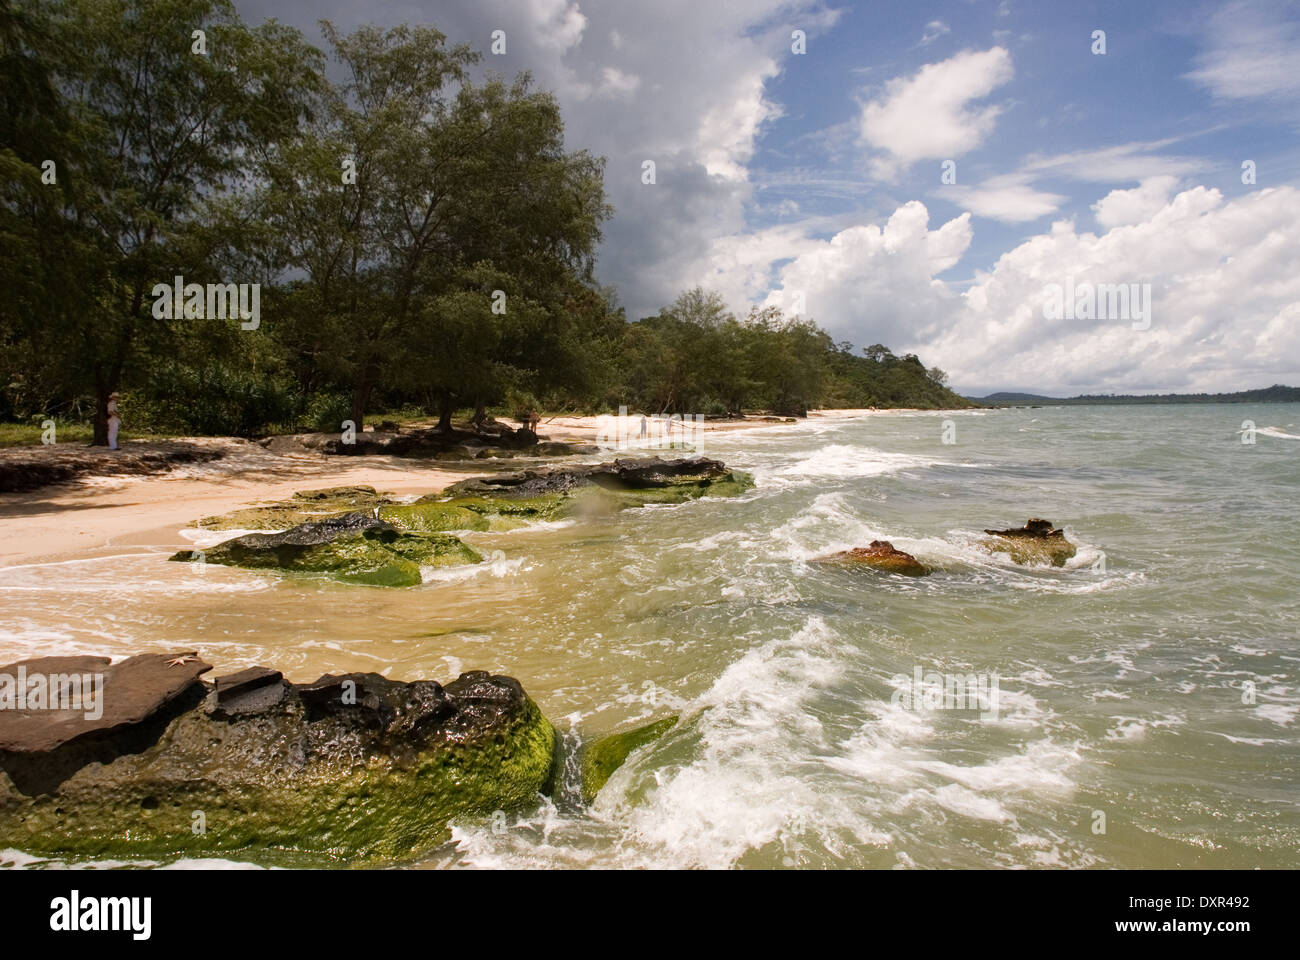 Virgin beach on the waterfront of Ream National Park. Ream National Park is located about 12 miles from Sihanoukville, Cambodia. Stock Photo